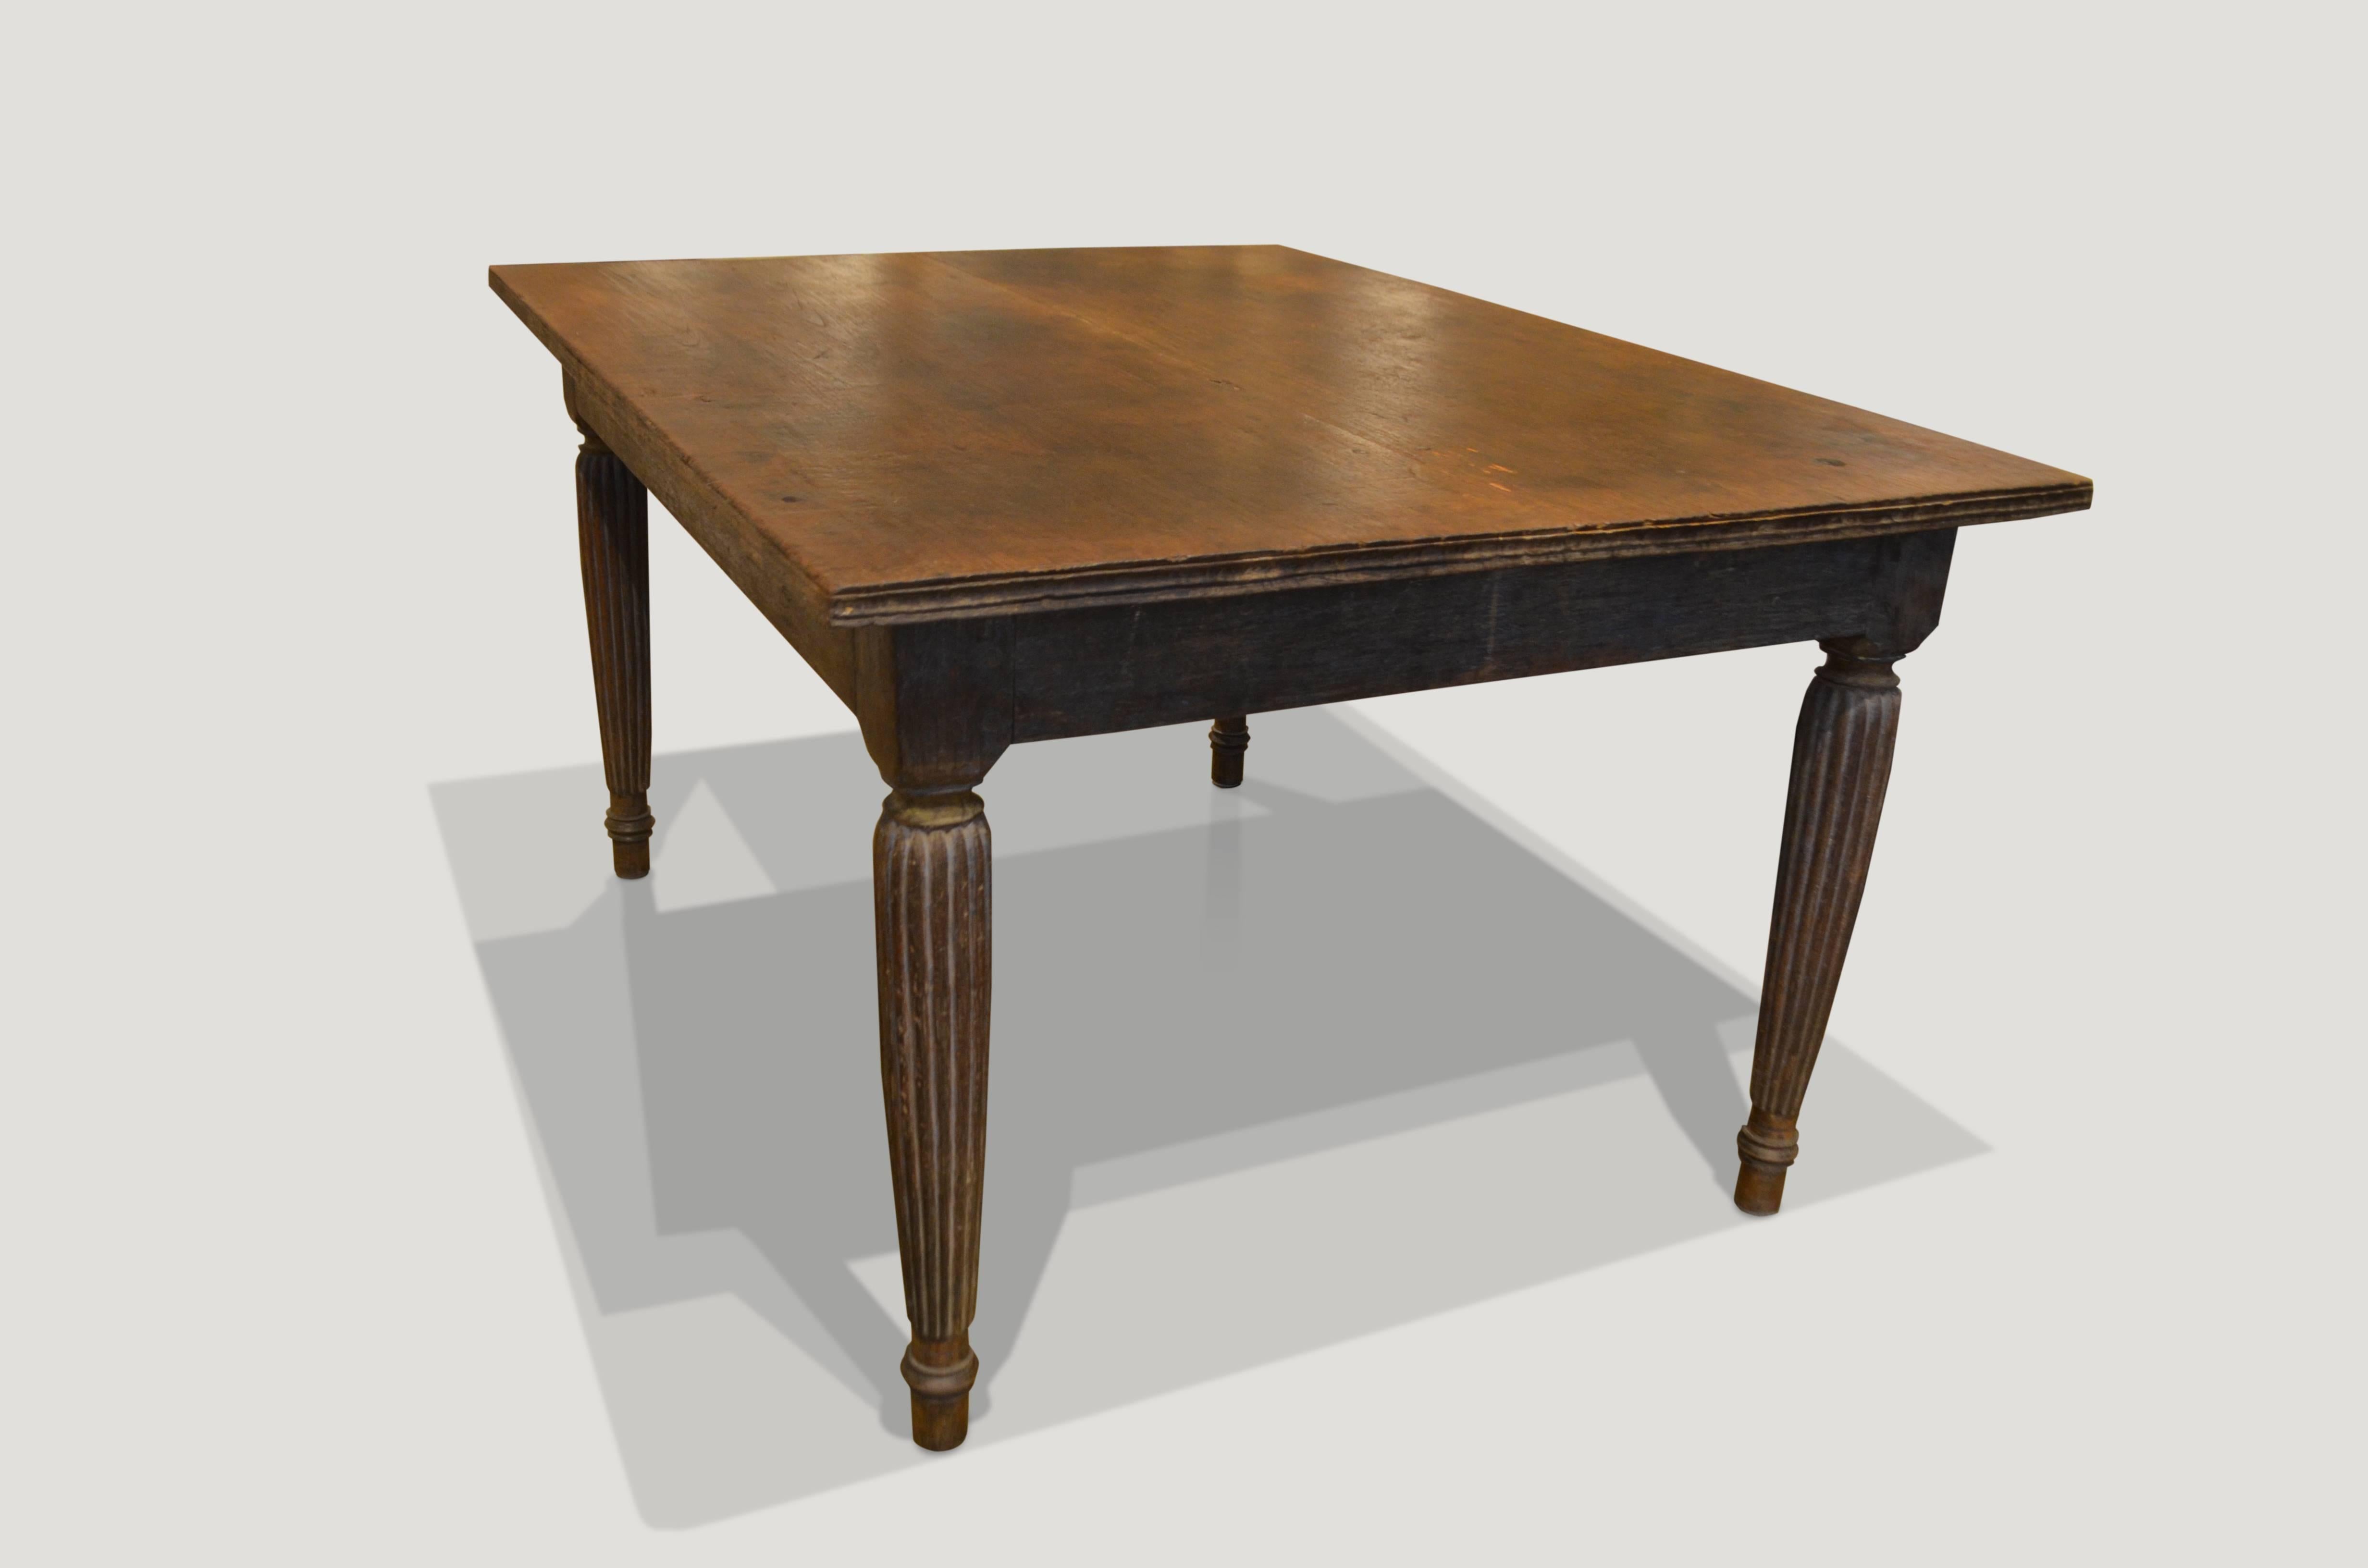 Antique teak dining table with a hand carved bevelled edge and hand carved legs with beautiful patina. Perfect as a dining table, entrance table or desk.

This table was sourced in the spirit of wabi-sabi a Japanese philosophy that beauty can be